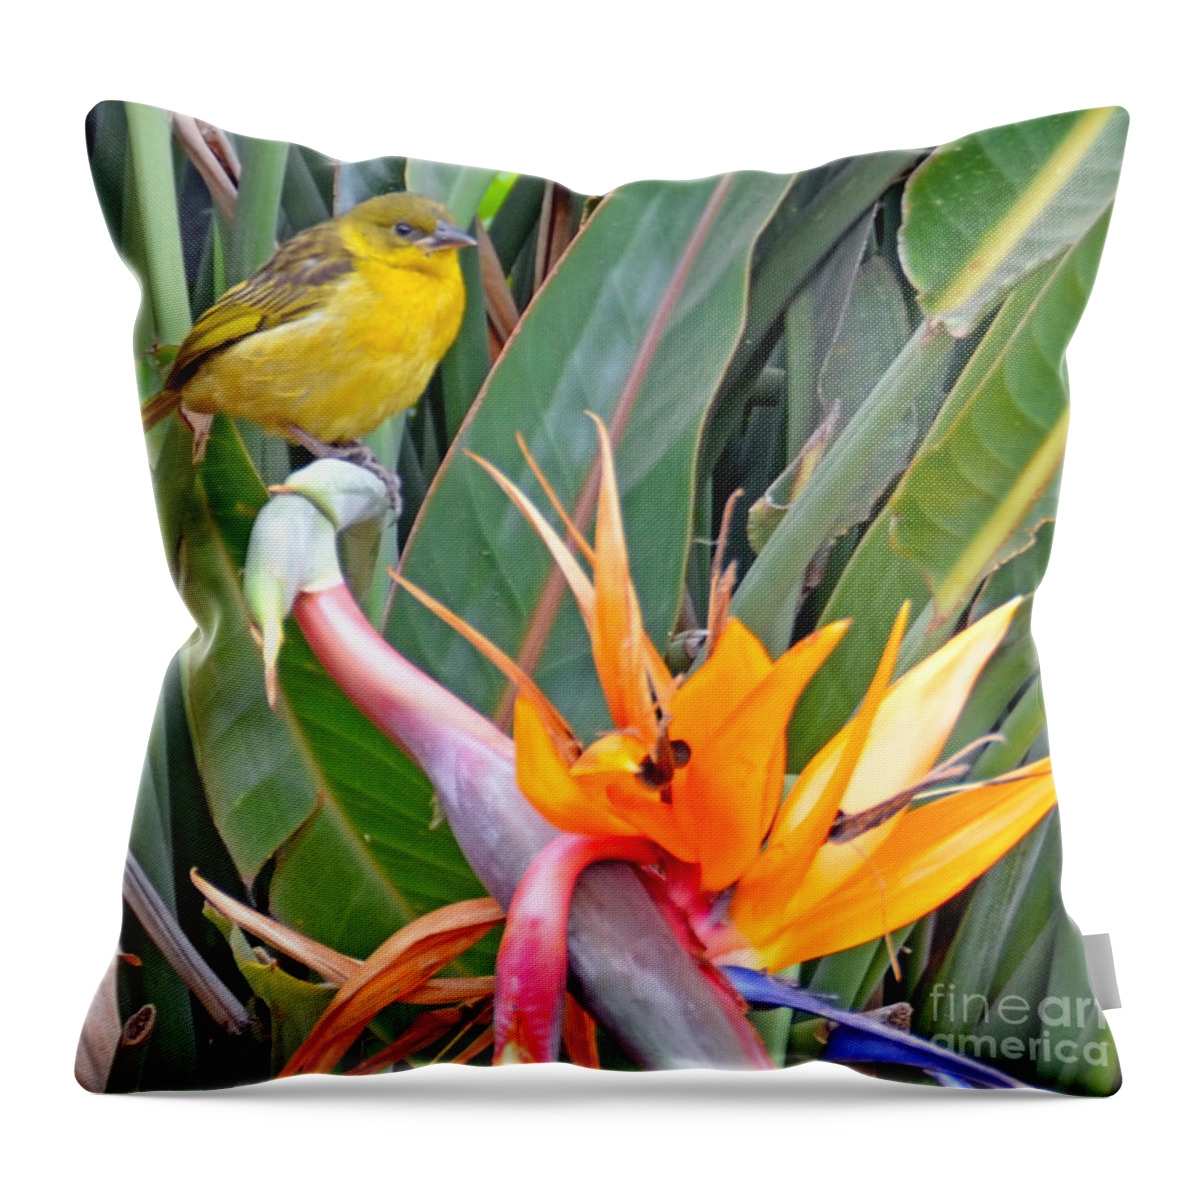 White-bellied Canary Throw Pillow featuring the digital art Canary on Bird of Paradise by Pravine Chester